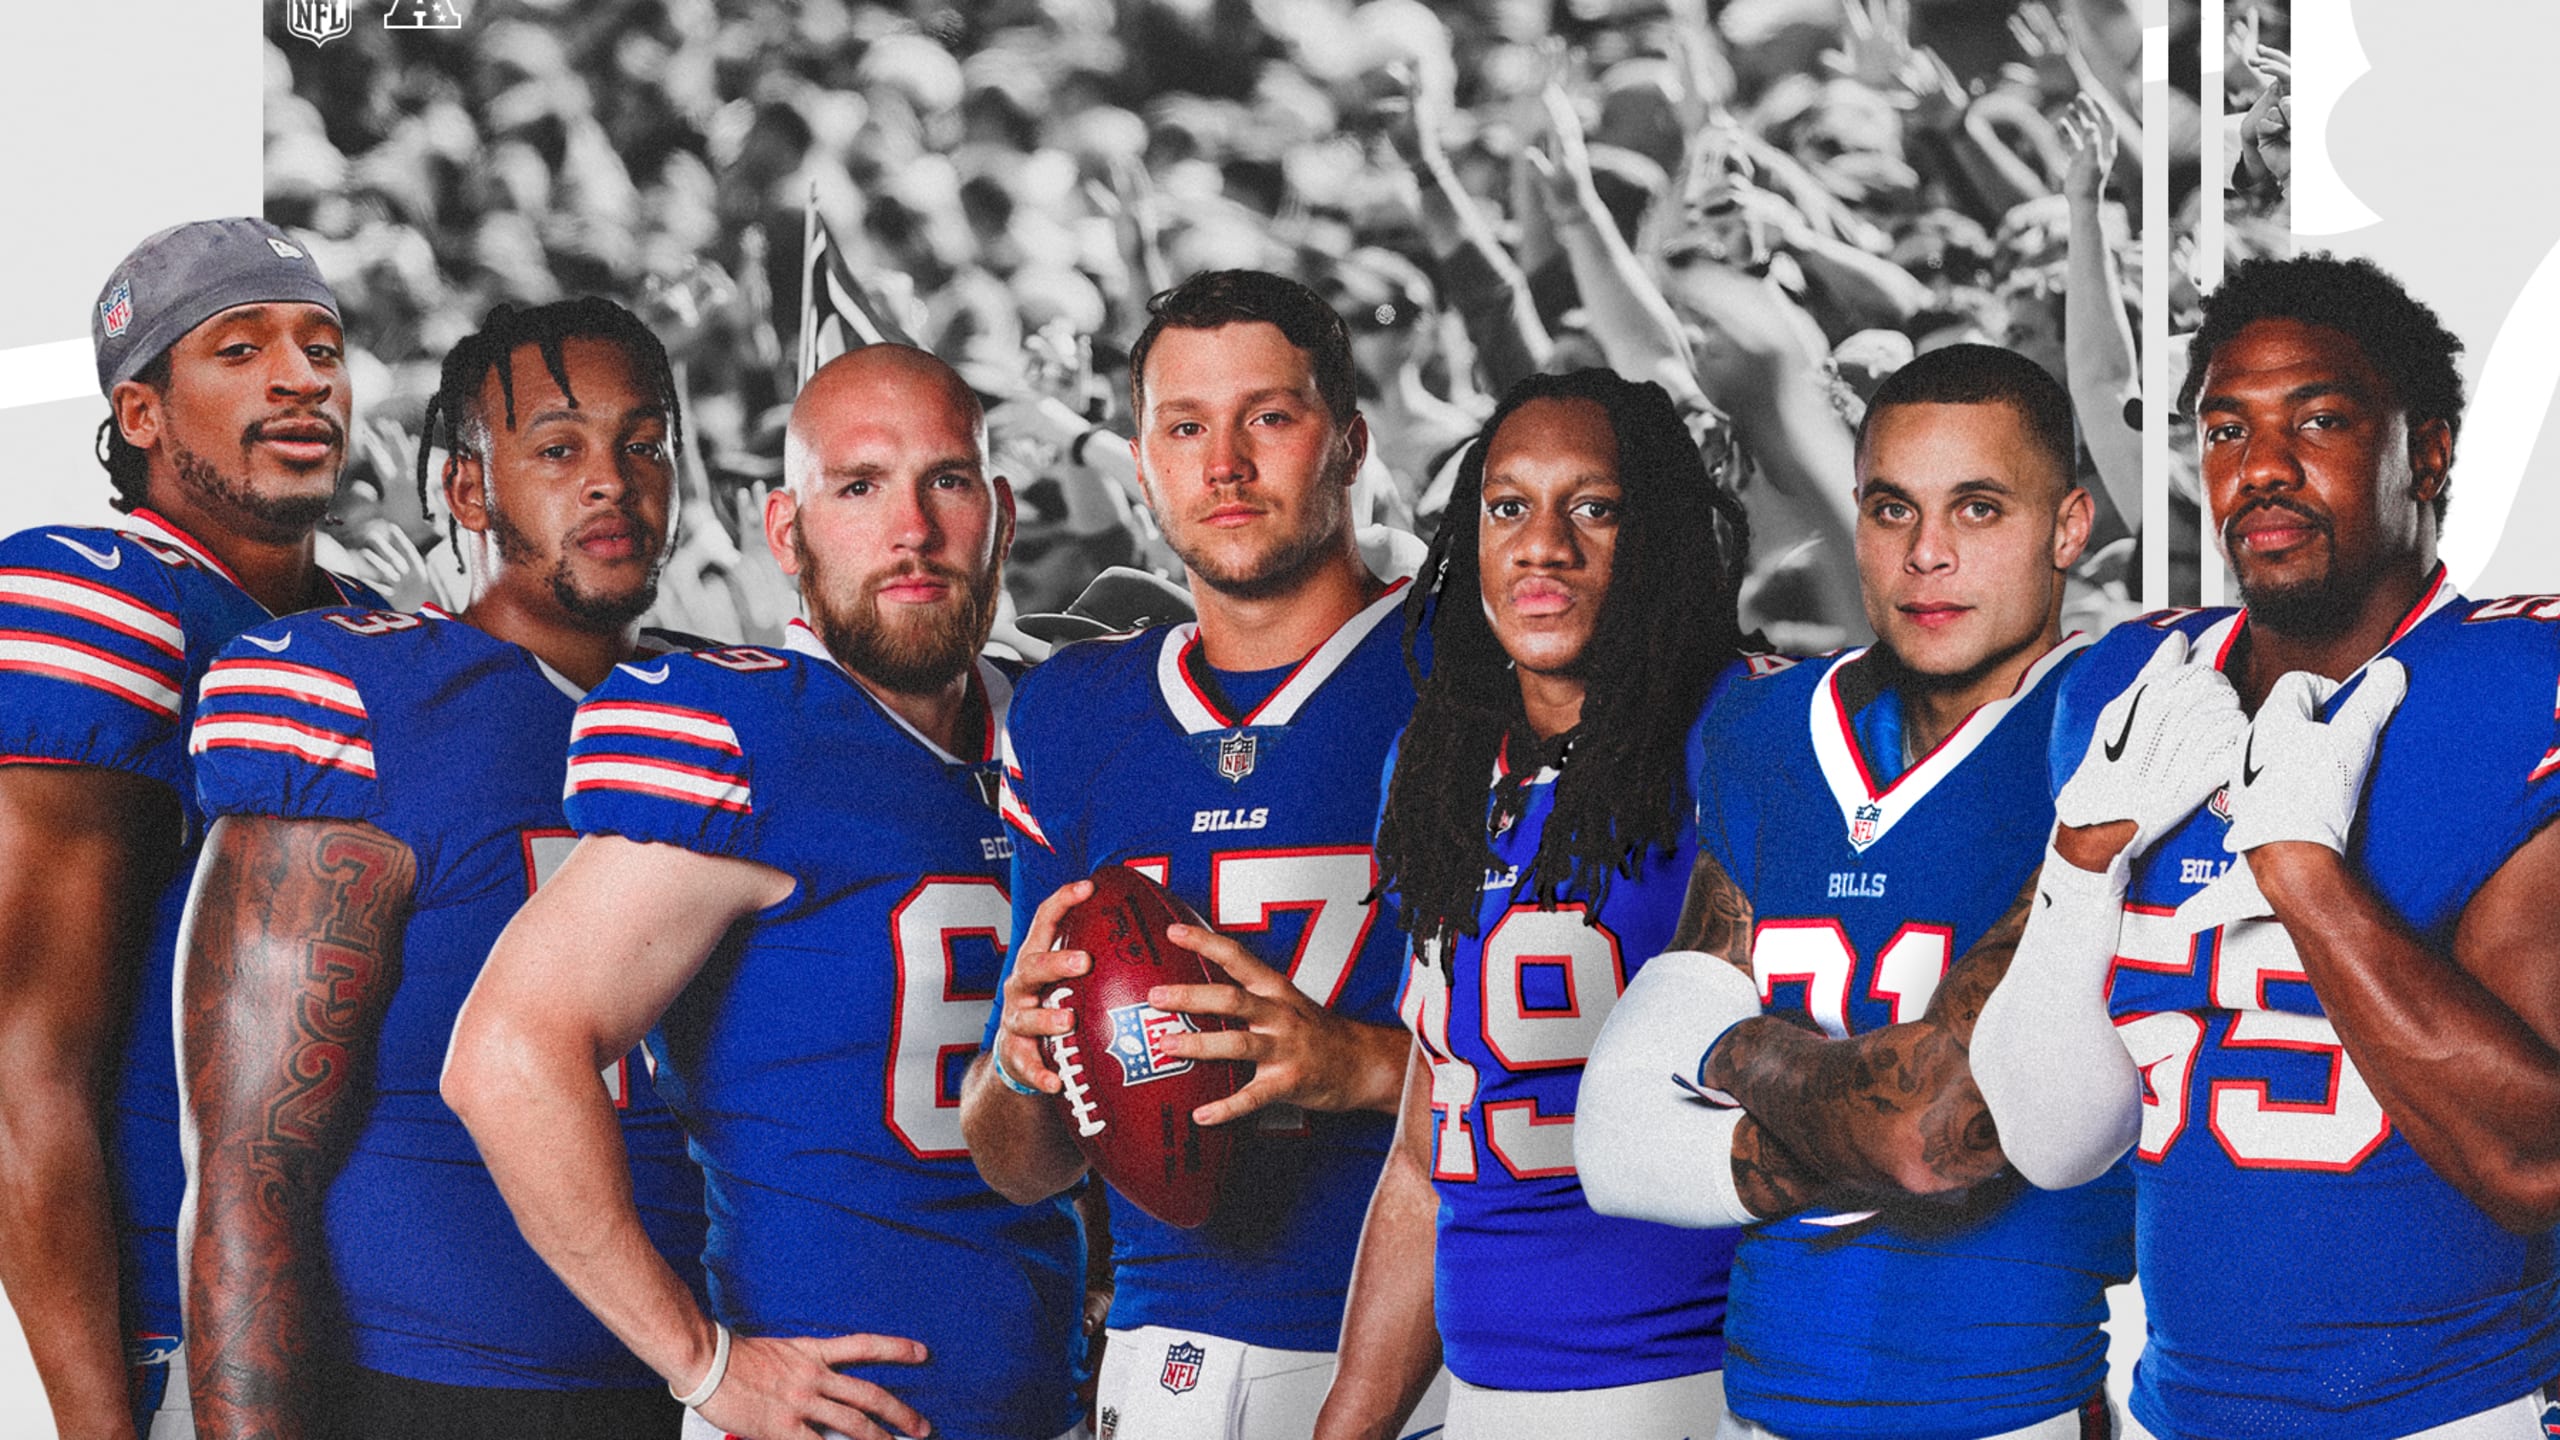 Bills elect these team captains for the 2020 season